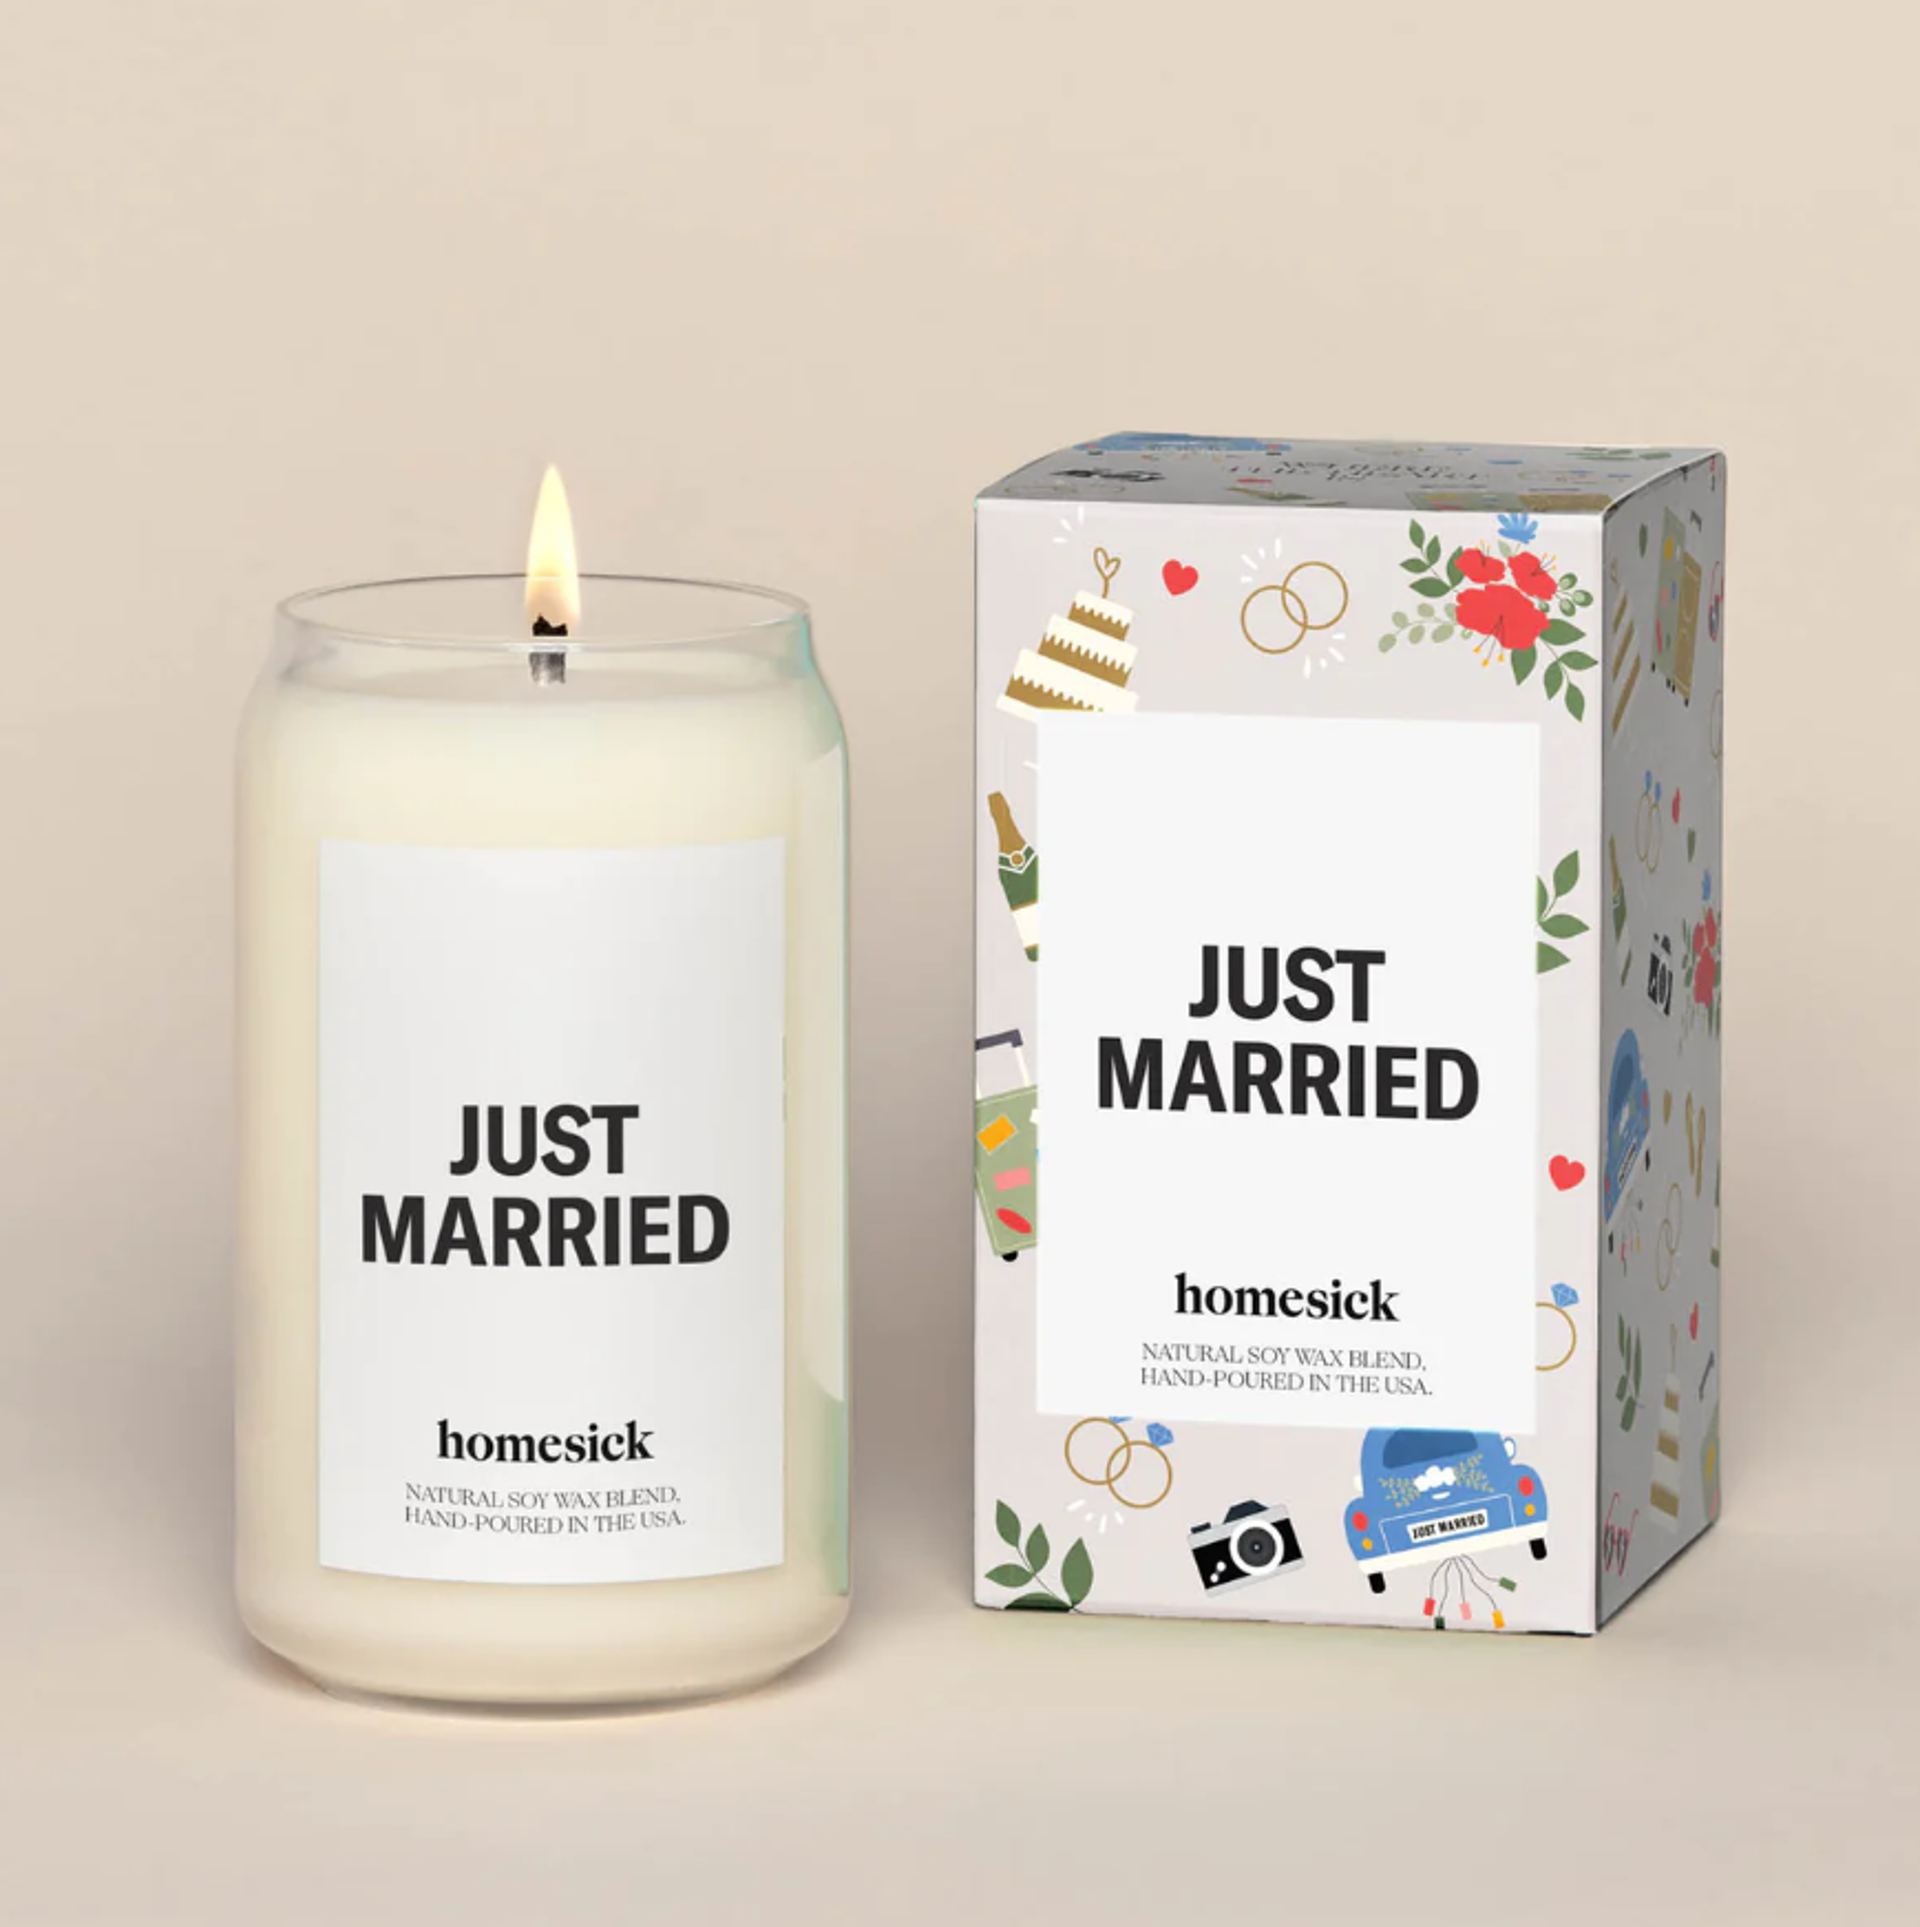 Just Married Candle by Chauvet Arts